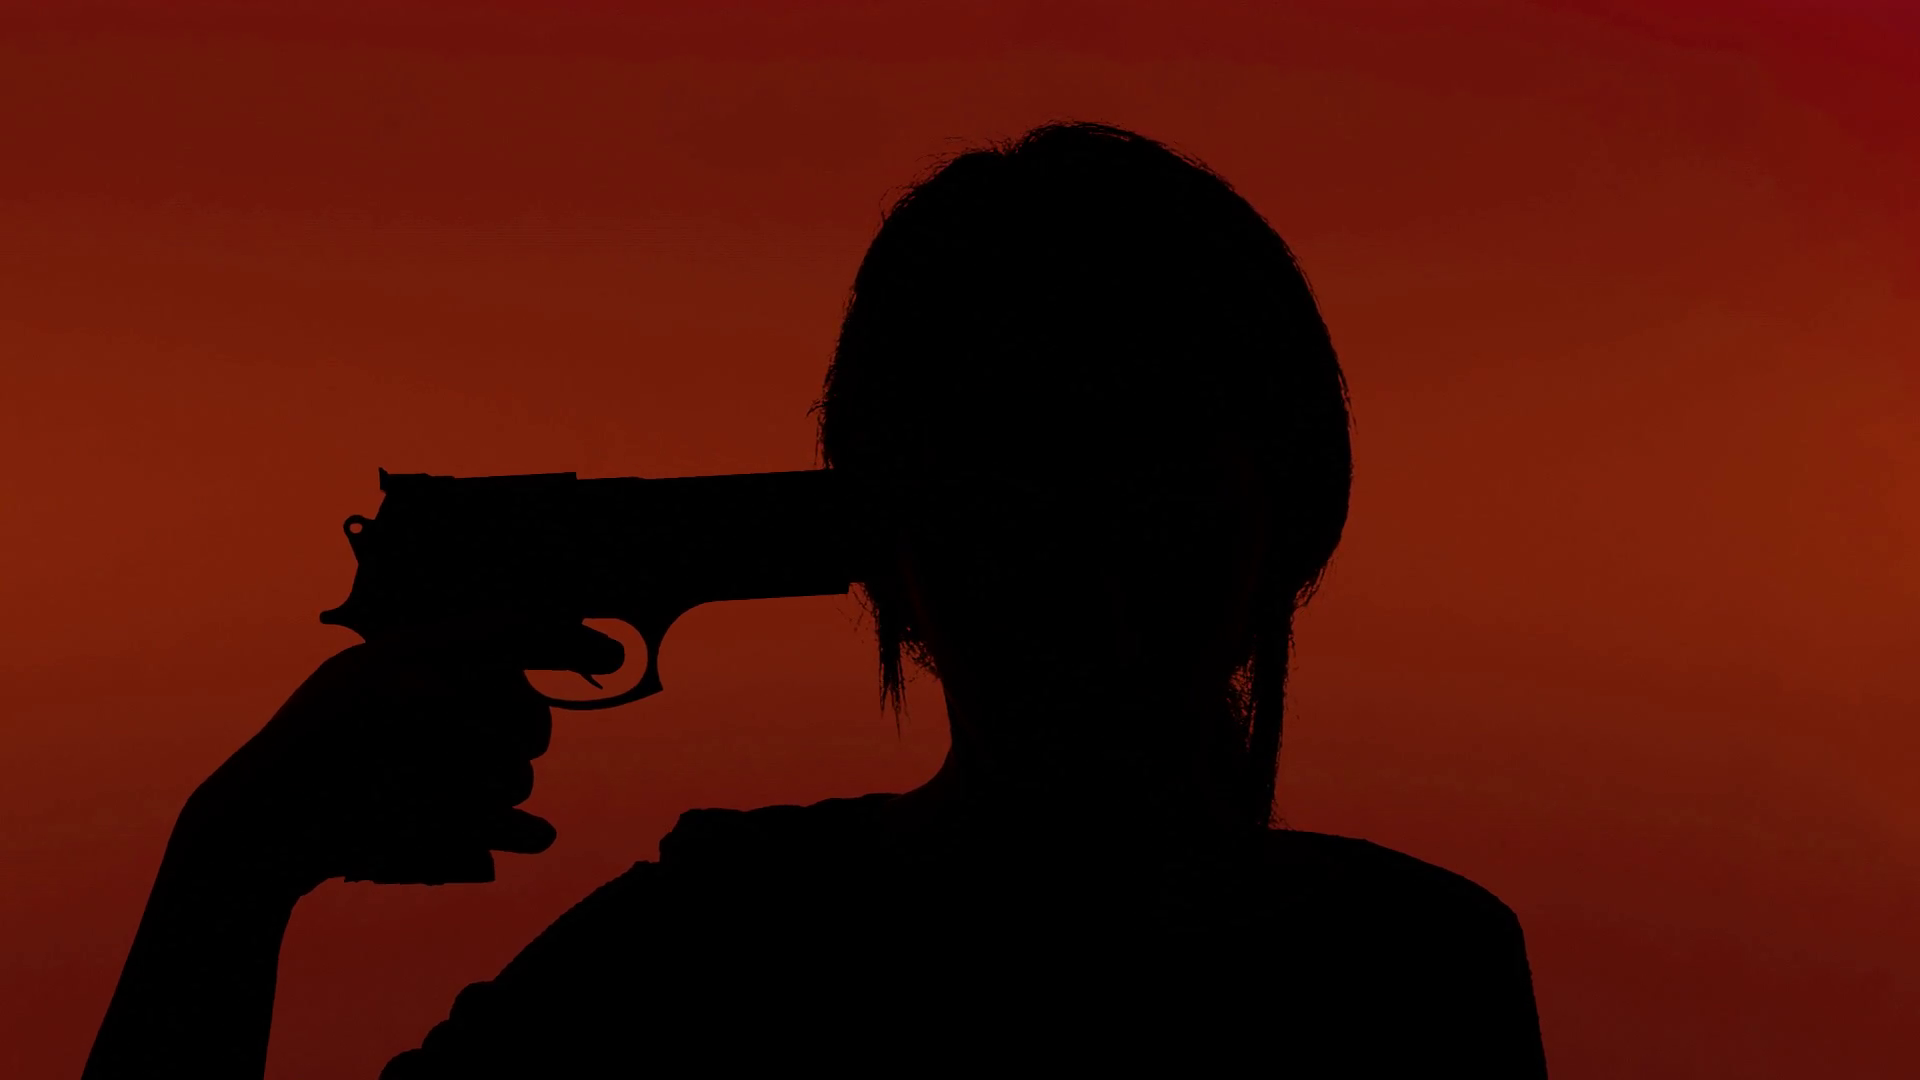 silhouette-woman-gun-suicidal-red-a-sad-depressed-woman-taking-a-gun-to-her-temple-and-trying-to-kill-herself-silhouette-shot-red-background-depression-failure-suicide_rpezu2ra_thumbna.png